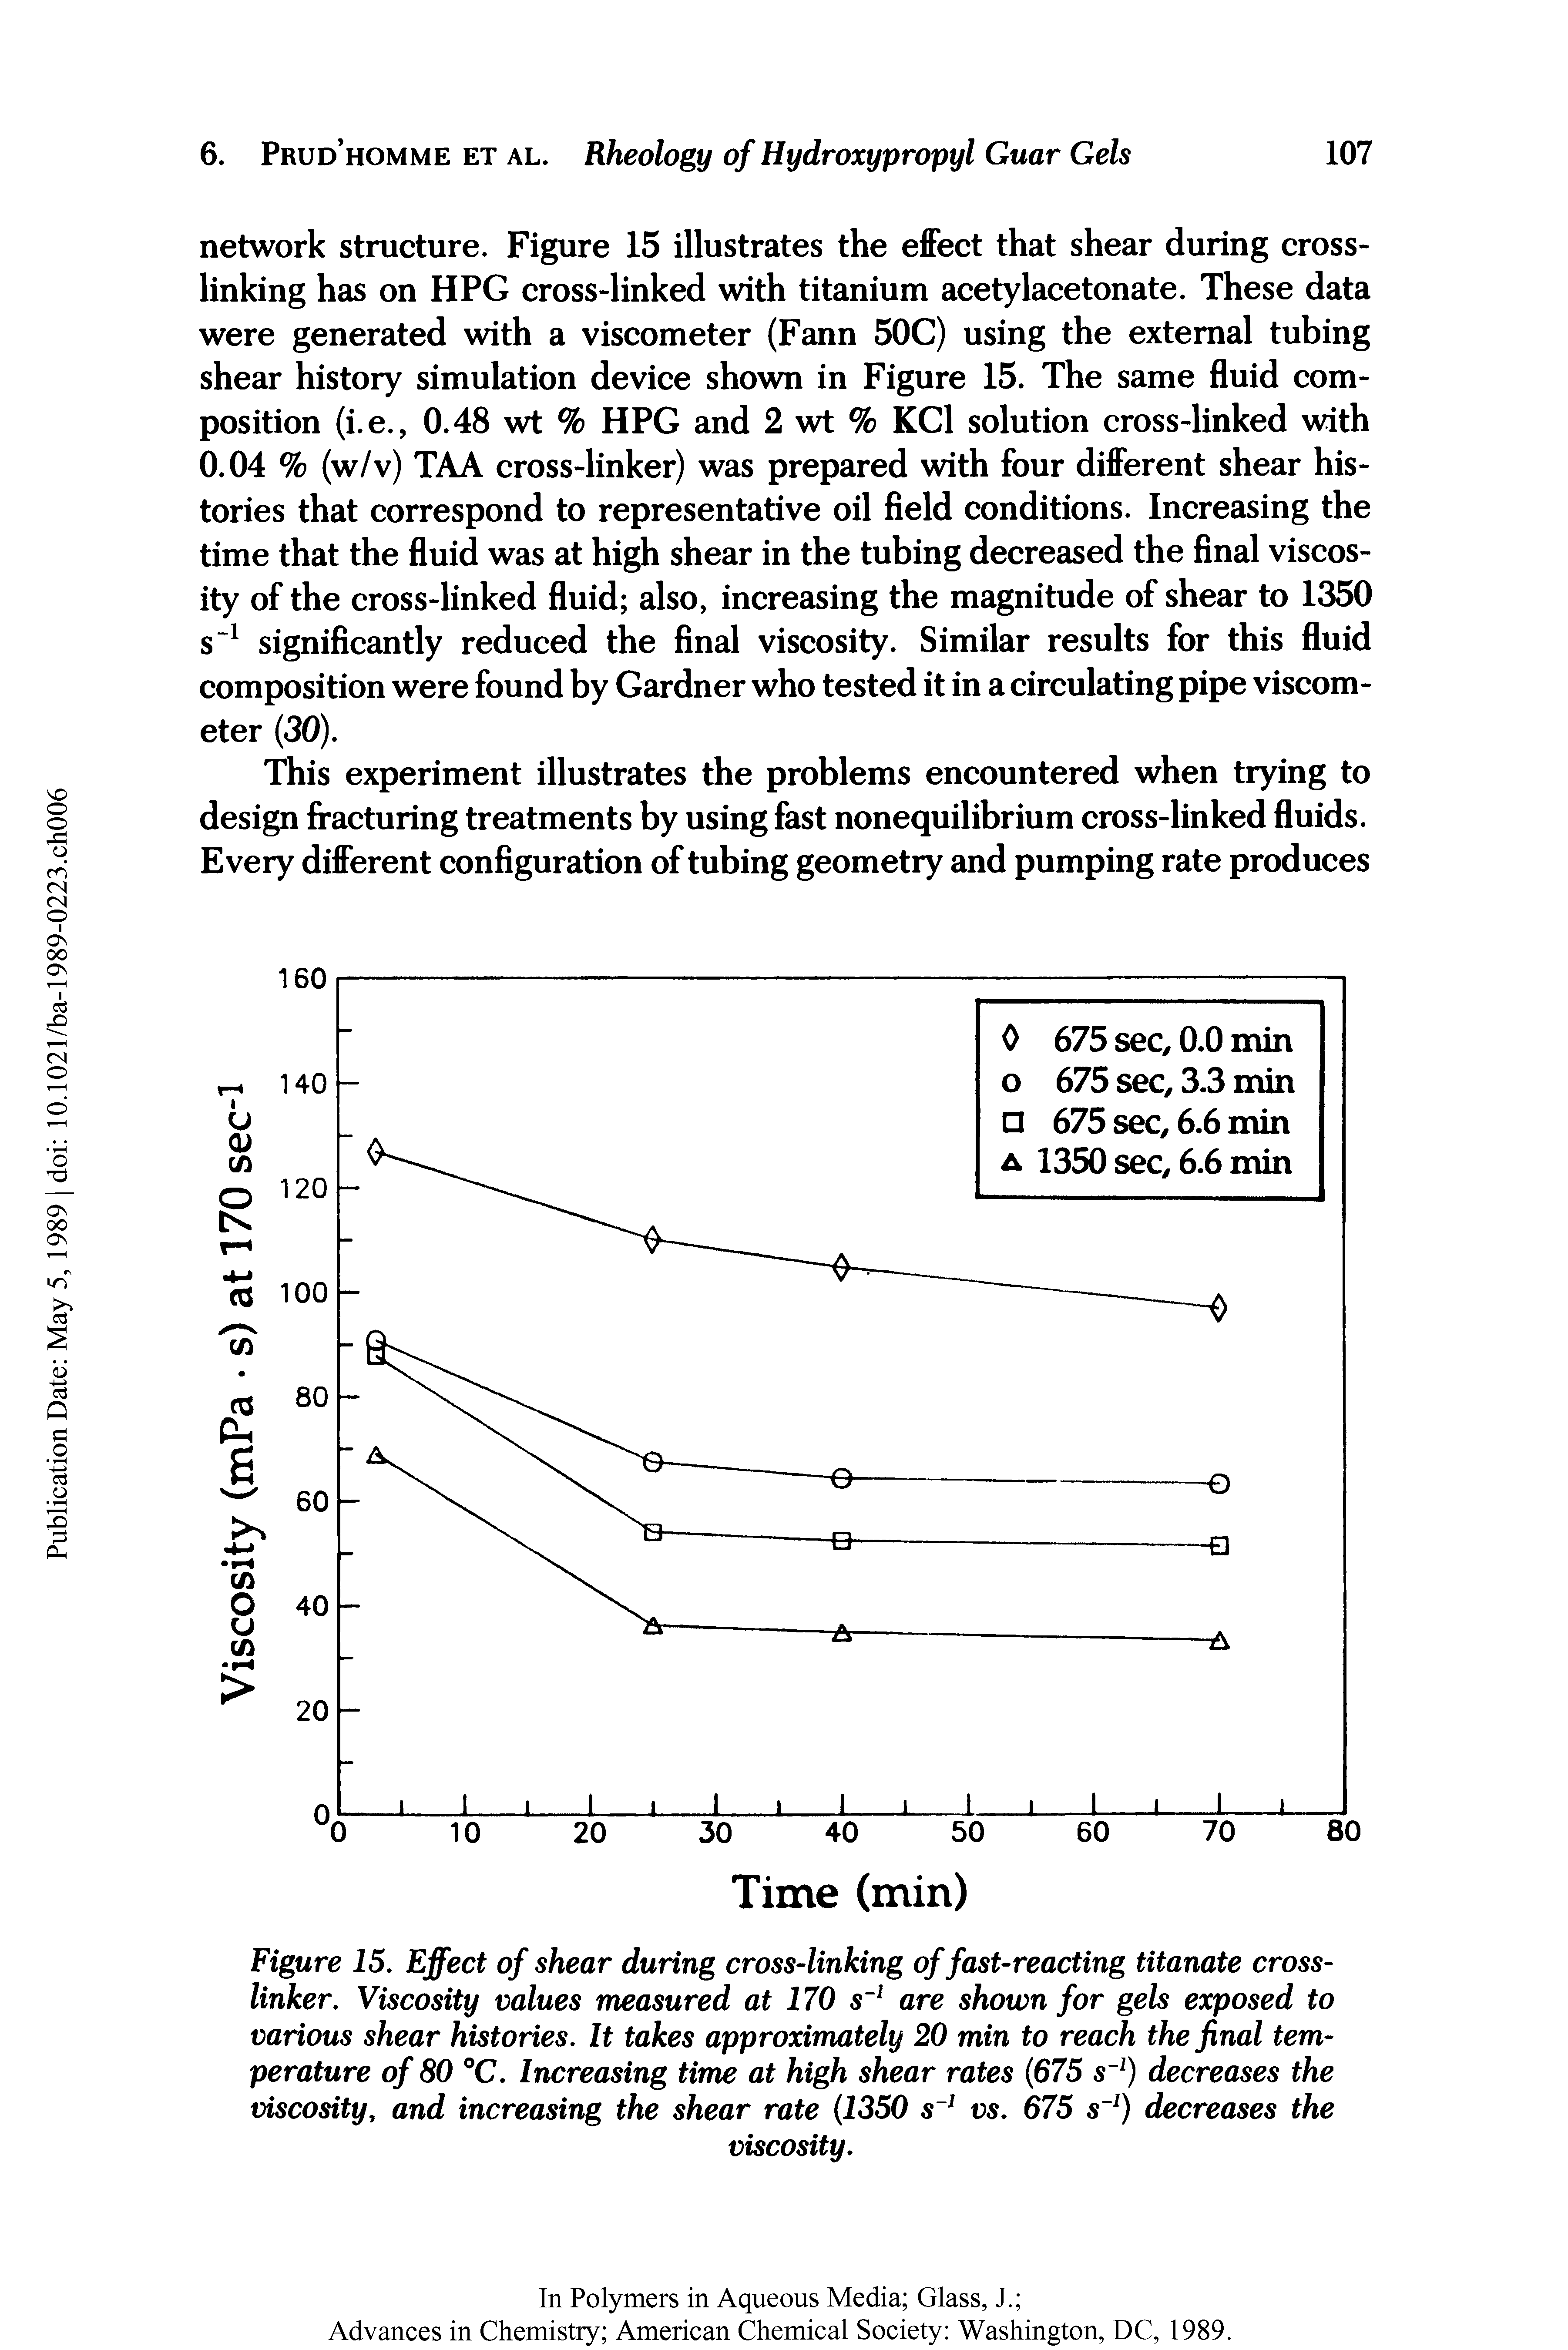 Figure 15. Effect of shear during cross-linking of fast-reacting titanate crosslinker. Viscosity values measured at 170 s are shown for gels exposed to various shear histories. It takes approximately 20 min to reach the final temperature of 80 °C. Increasing time at high shear rates (675 s ) decreases the viscosity, and increasing the shear rate 1350 s vs. 675 s ) decreases the...